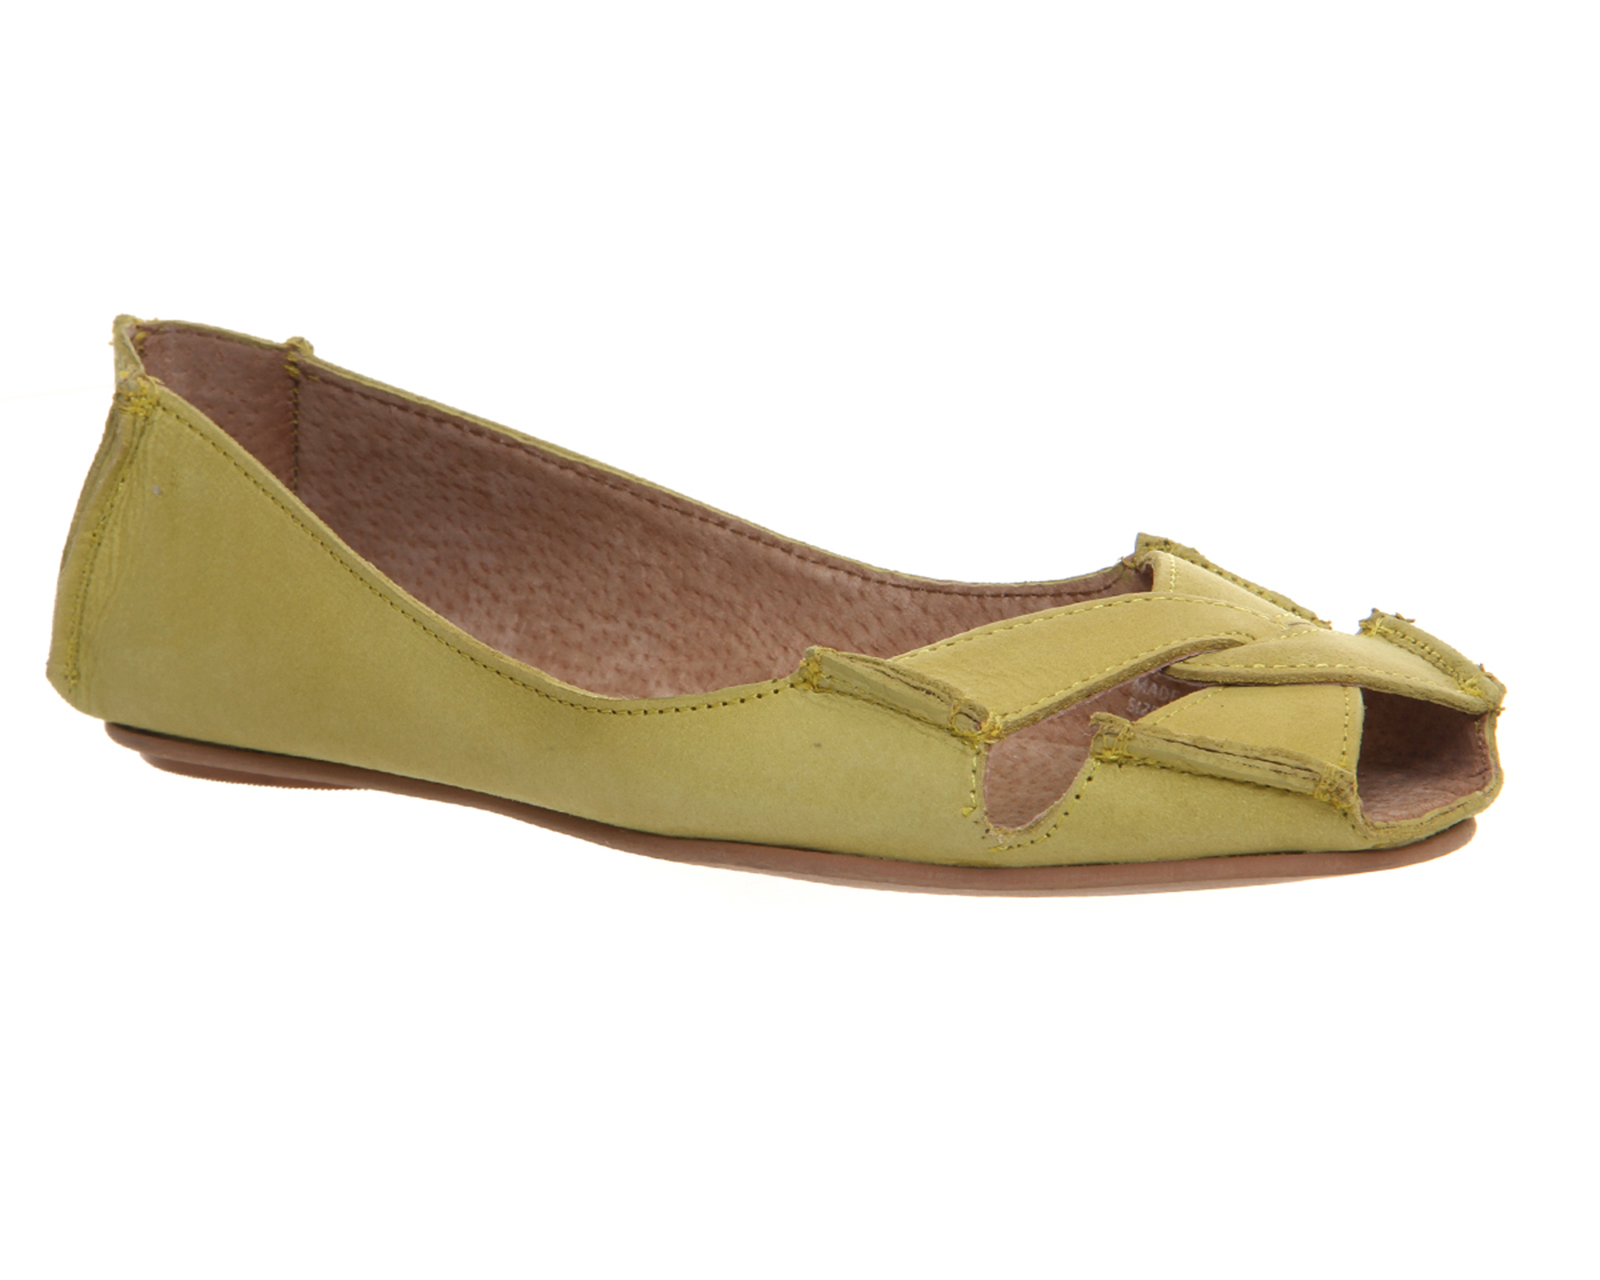 OFFICELuxe Softy Peep ShoeYellow Leather